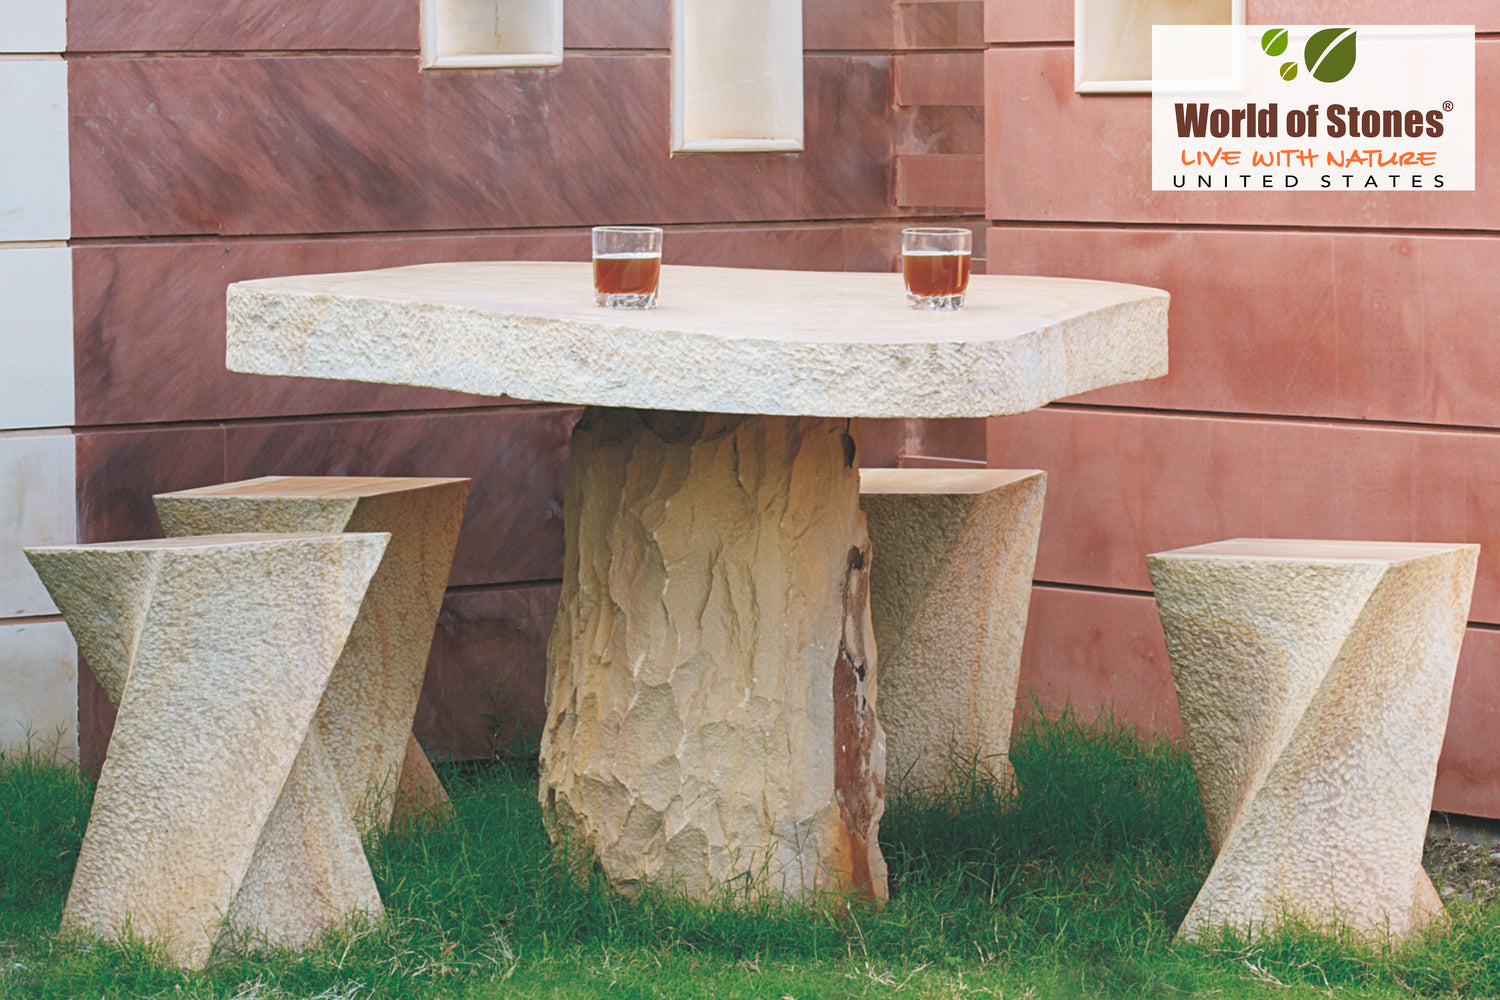 8 Amazing Natural Stone Crafts That Will Beautify Your Backyard